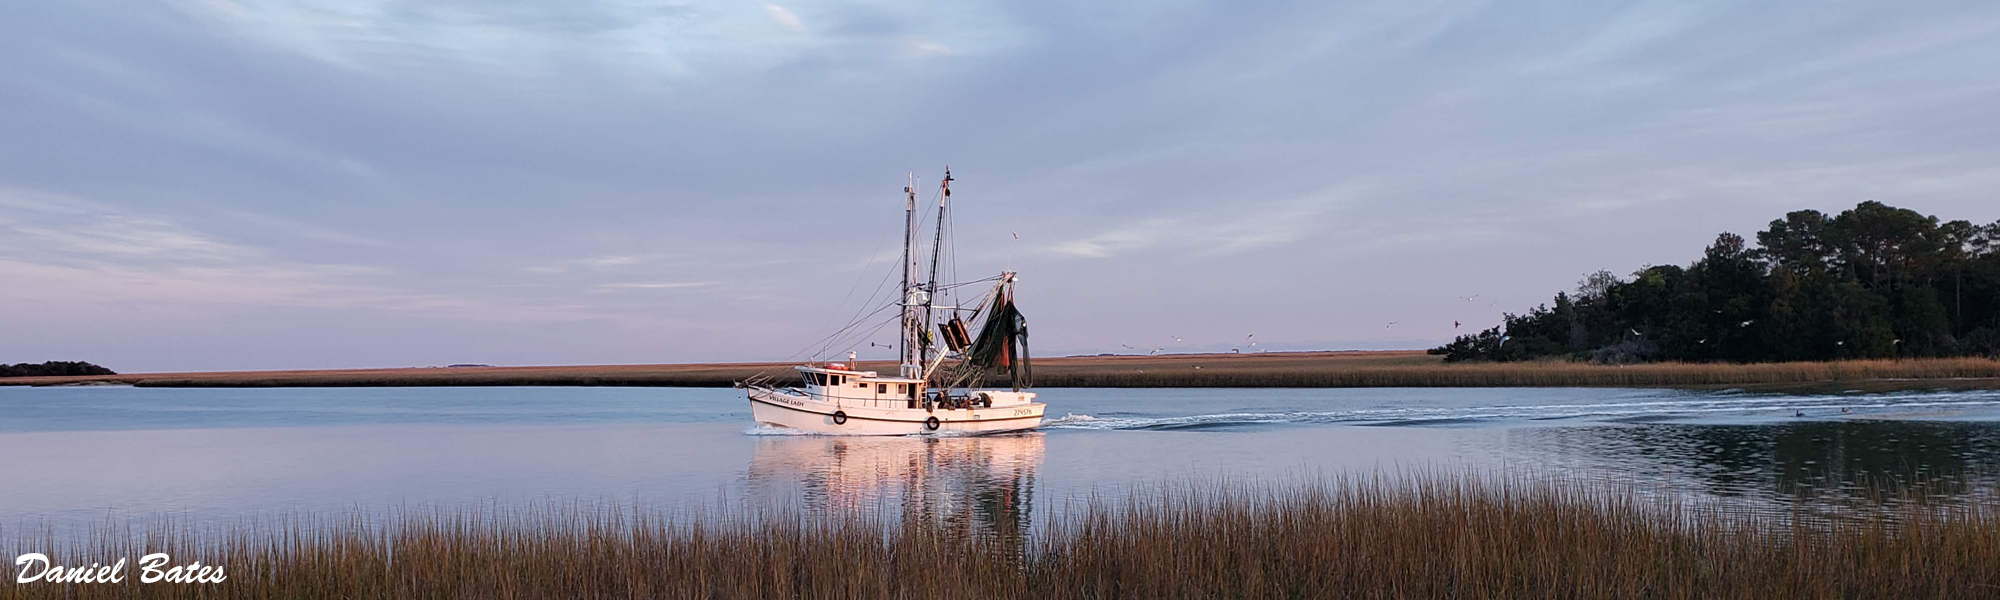 McClellanville Shrimp Boat at the Mouth of Jeremy Creek